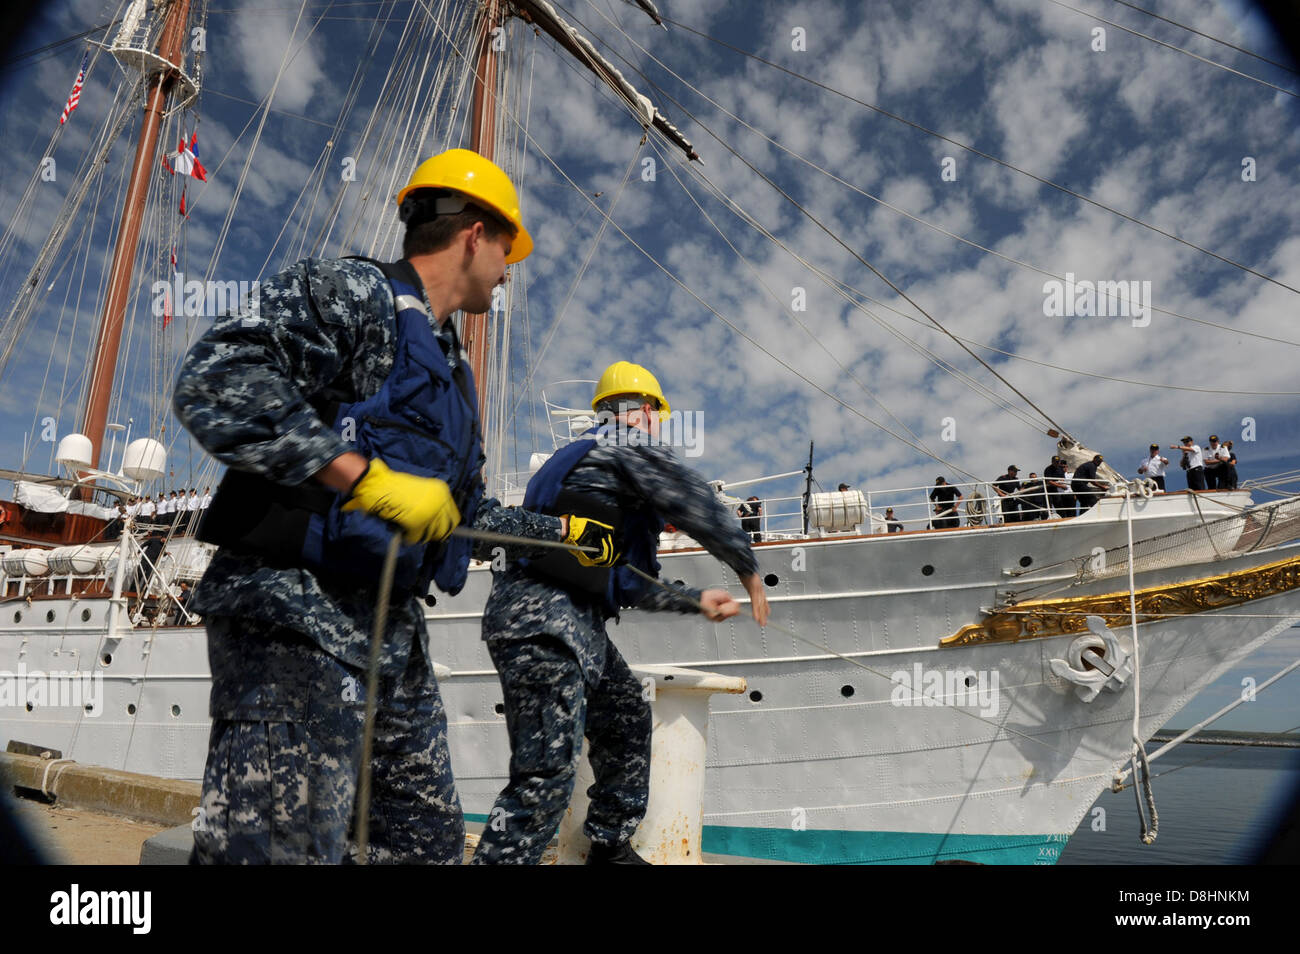 Sailors handle lines for a Spanish navy ship. Stock Photo